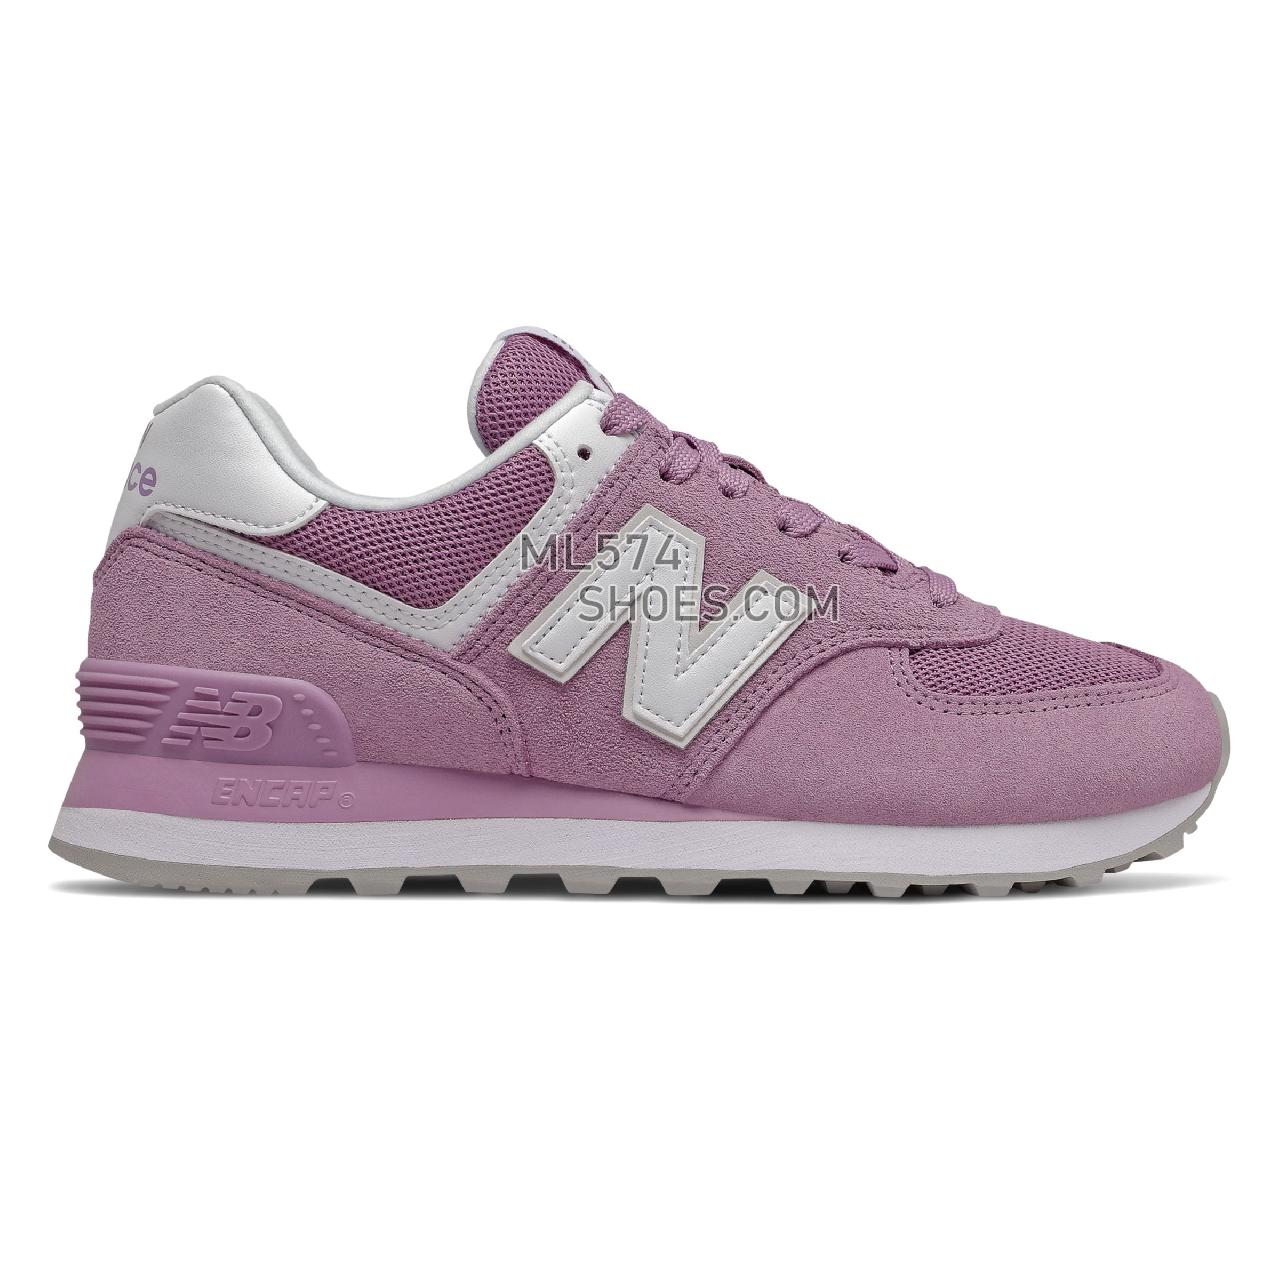 New Balance 574 - Women's Classic Sneakers - Canyon Violet with White - WL574OAC